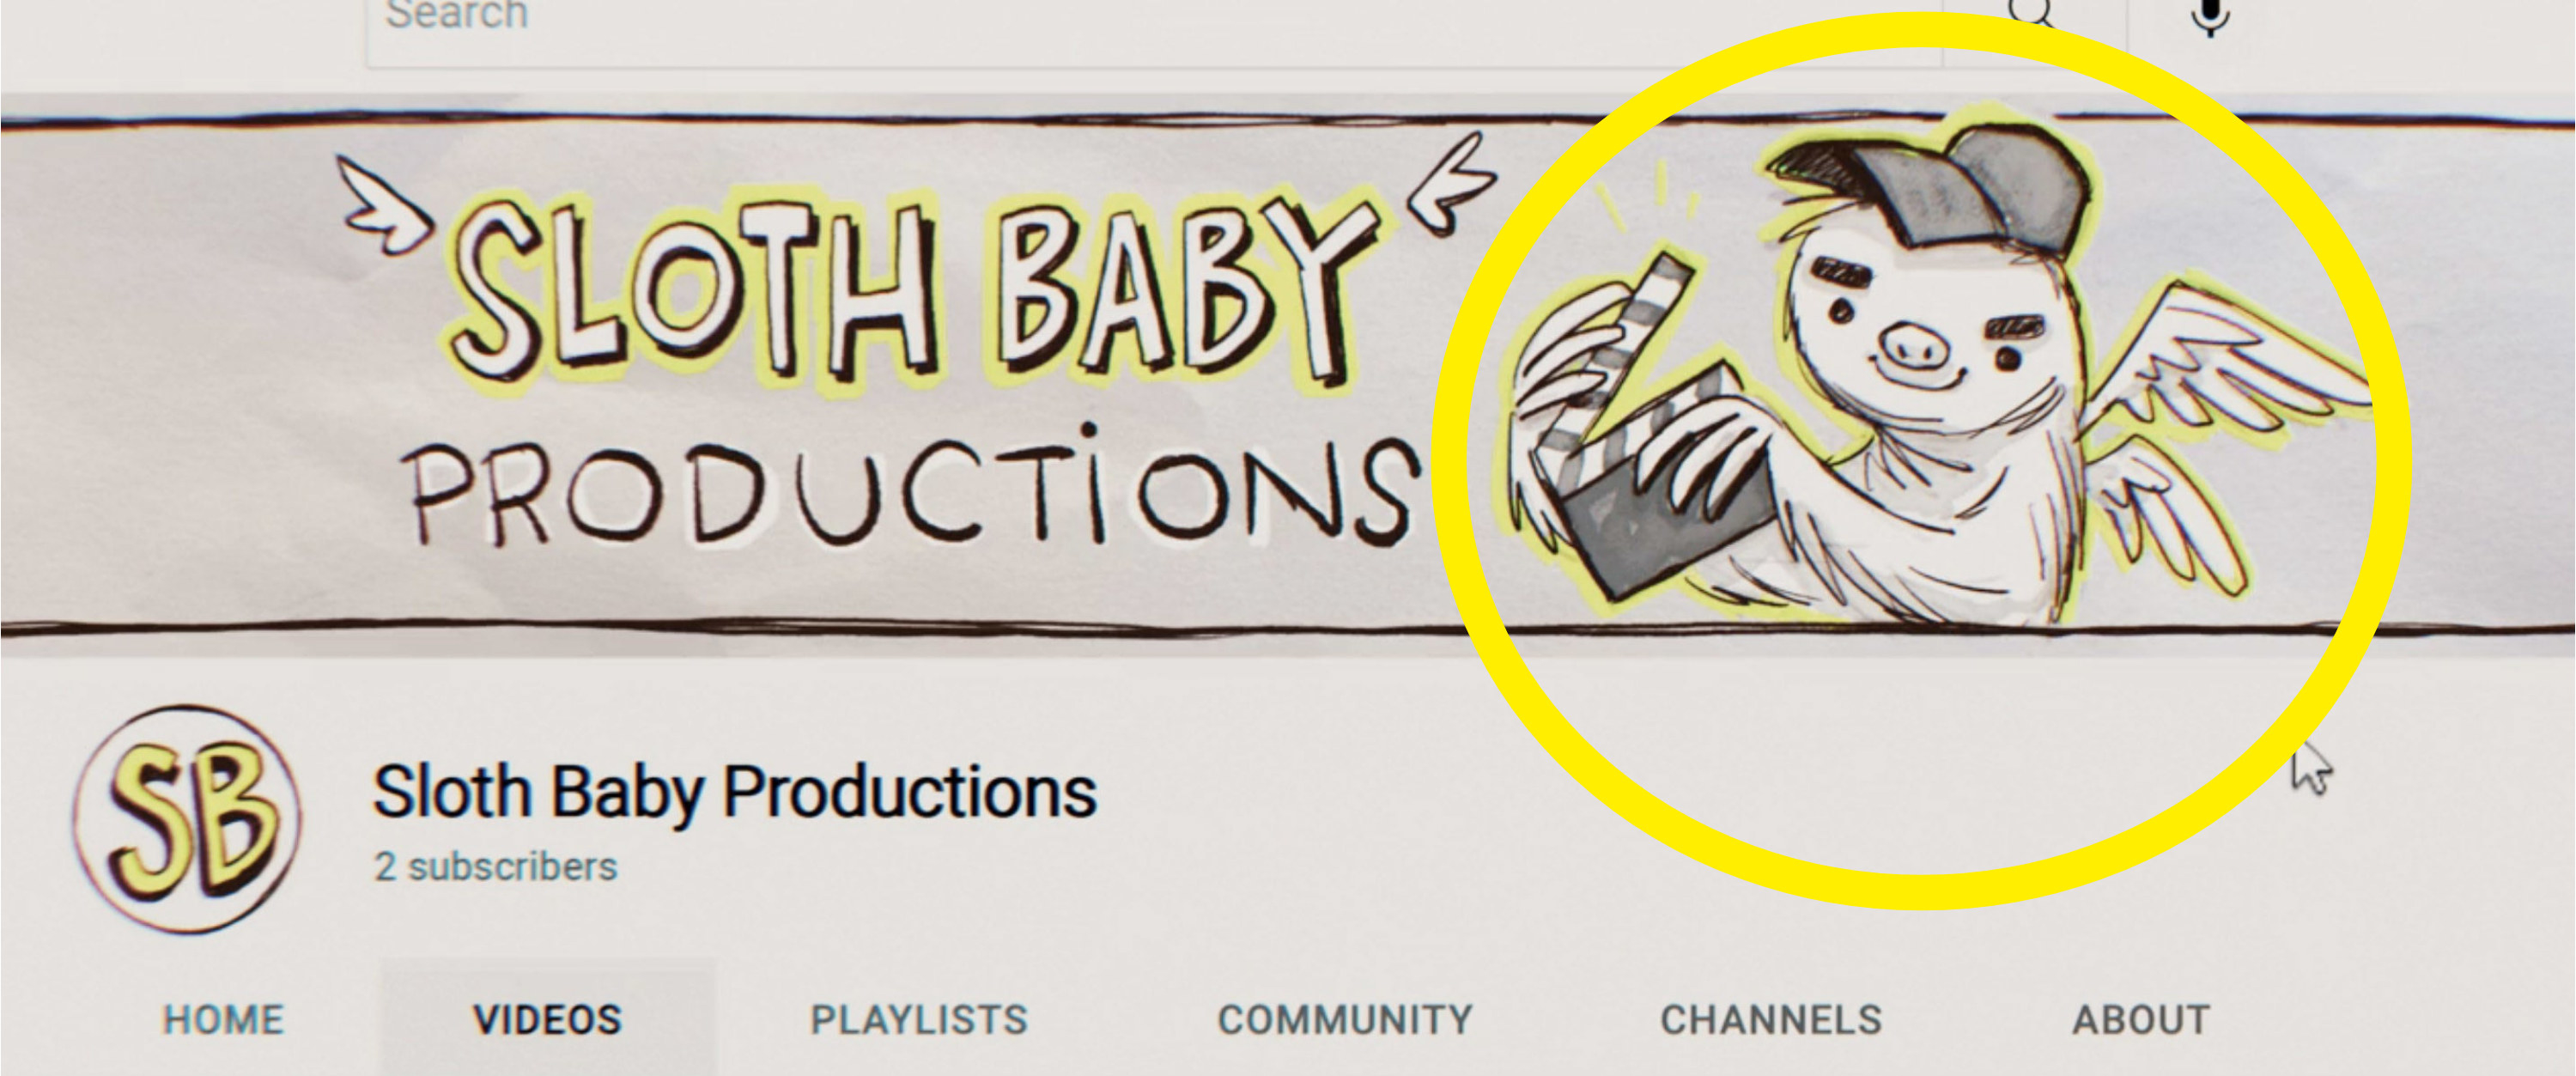 "Sloth Baby Productions"